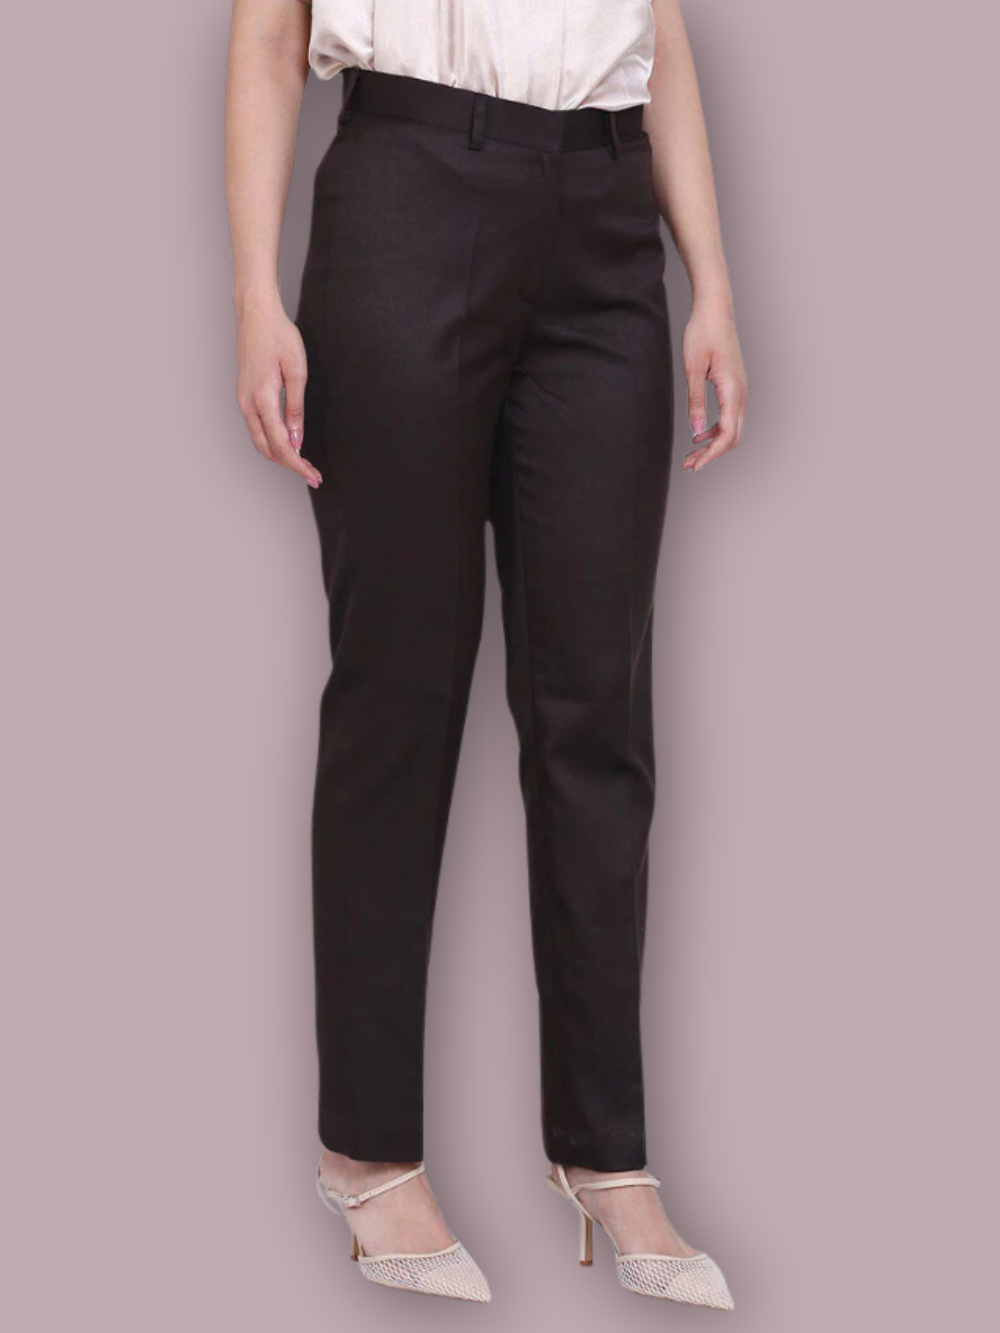 Buy Gold Trousers & Pants for Women by Power Sutra Online